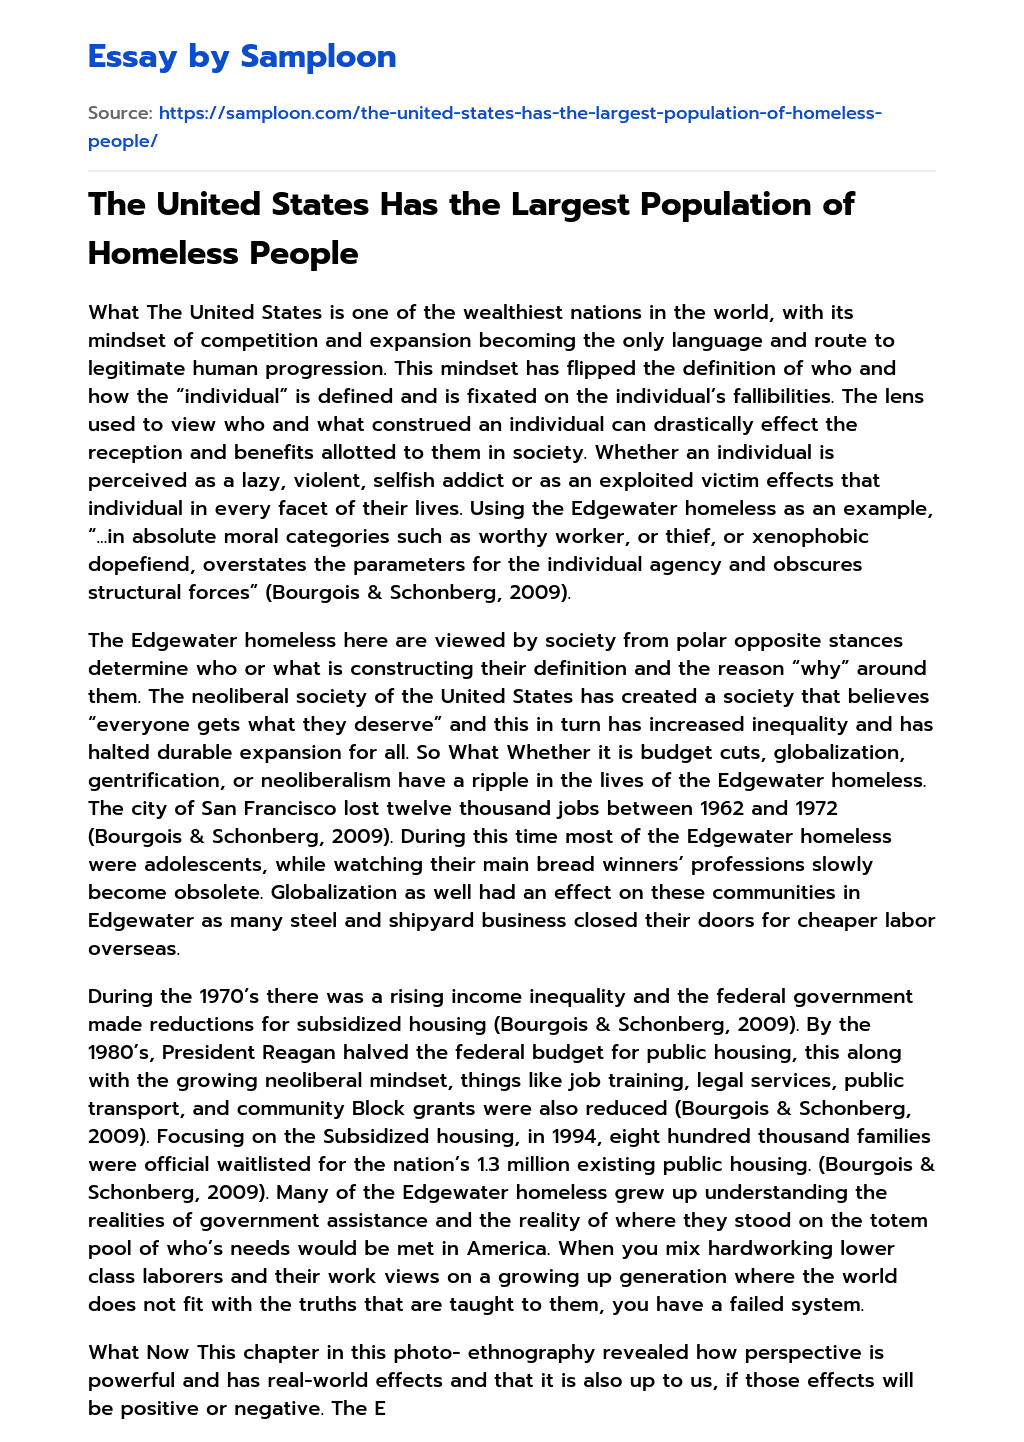 The United States Has the Largest Population of Homeless People essay